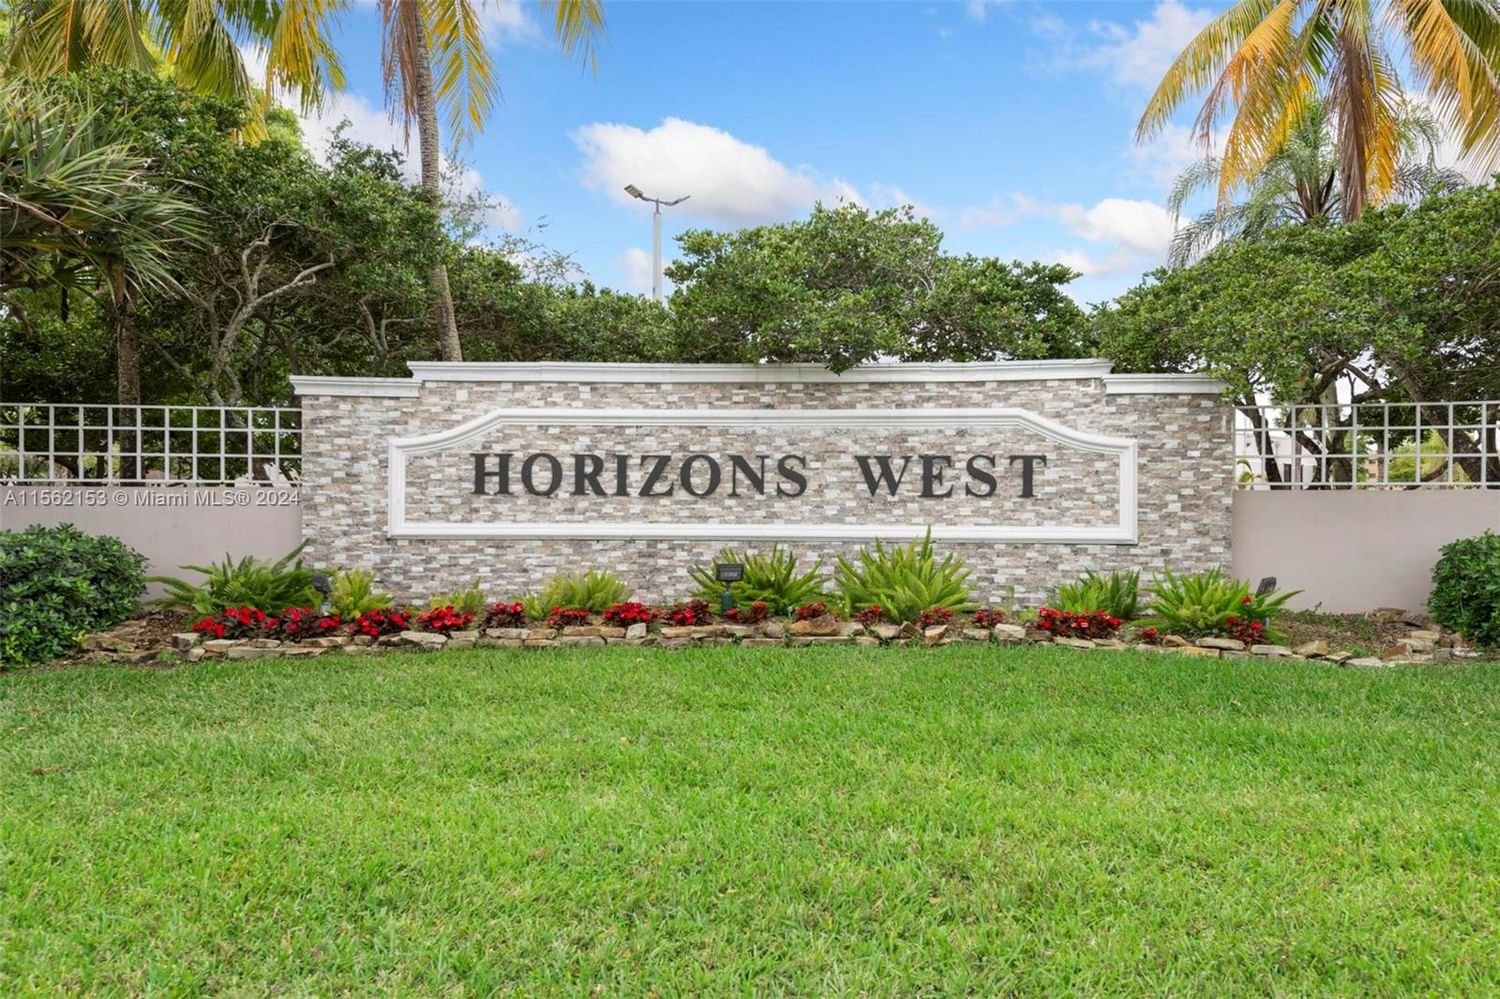 Real estate property located at 8420 133rd Ave Rd #219-2, Miami-Dade County, HORIZONS WEST CONDO #2, Miami, FL